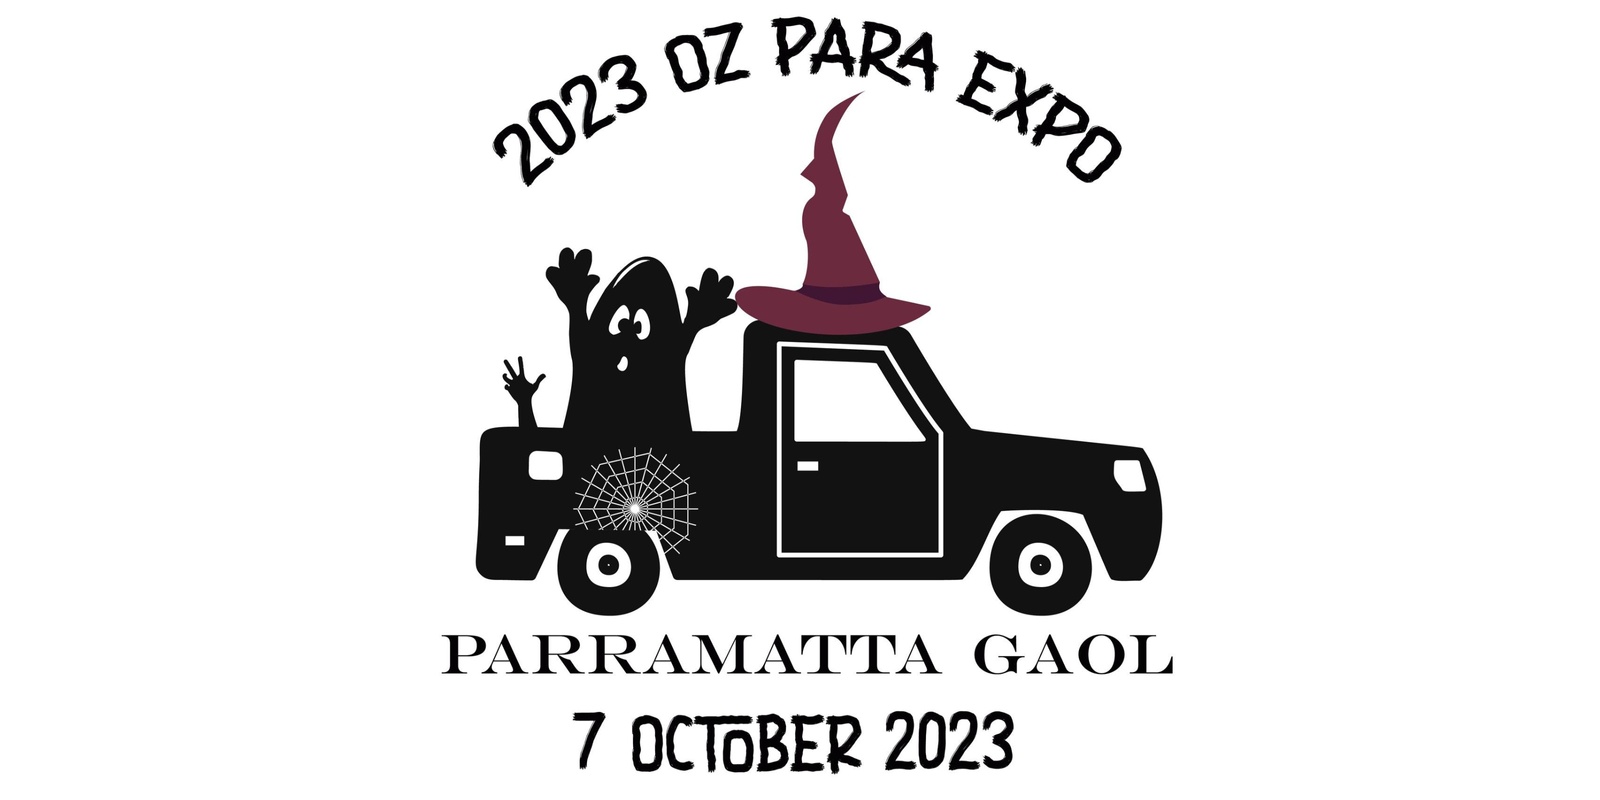 Banner image for Oz Para Expo - Saturday 7 October 2023